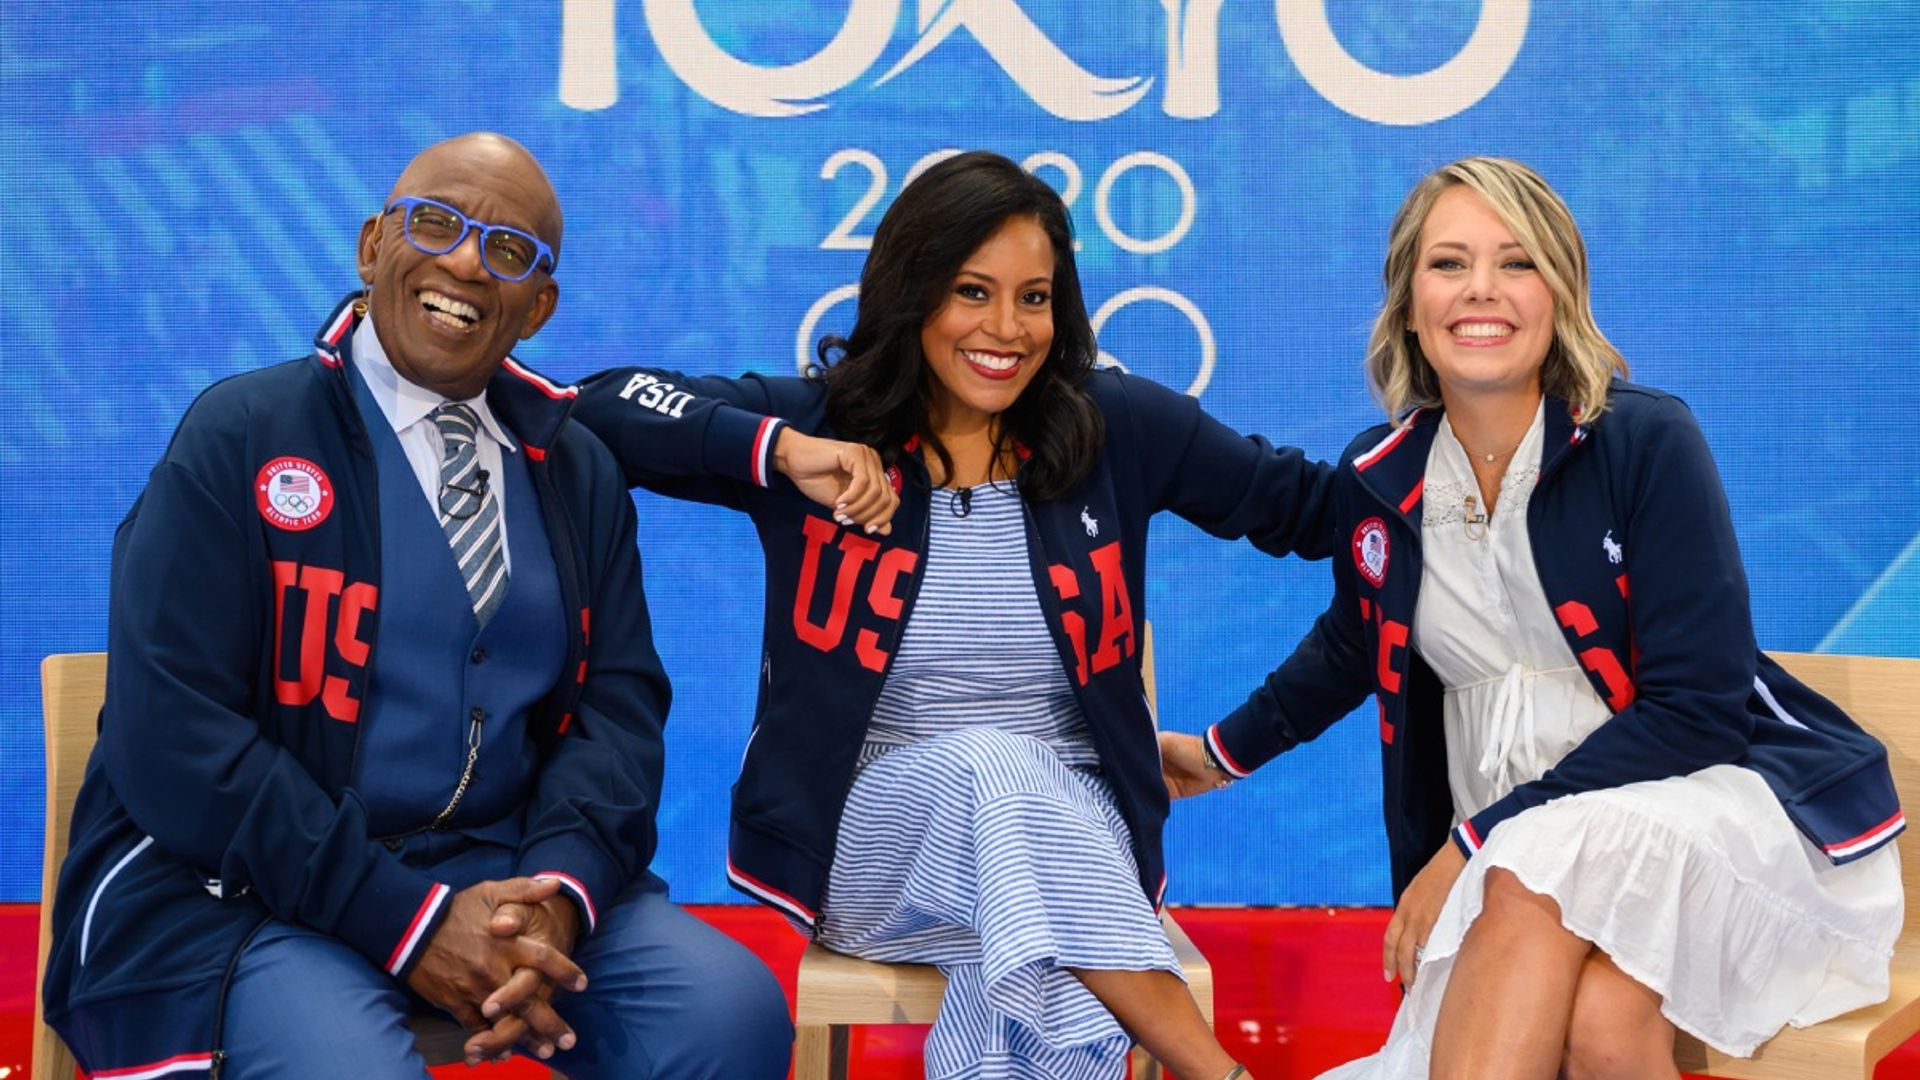 Dylan Dreyer has emotional reunion with Today co-stars for new assignment